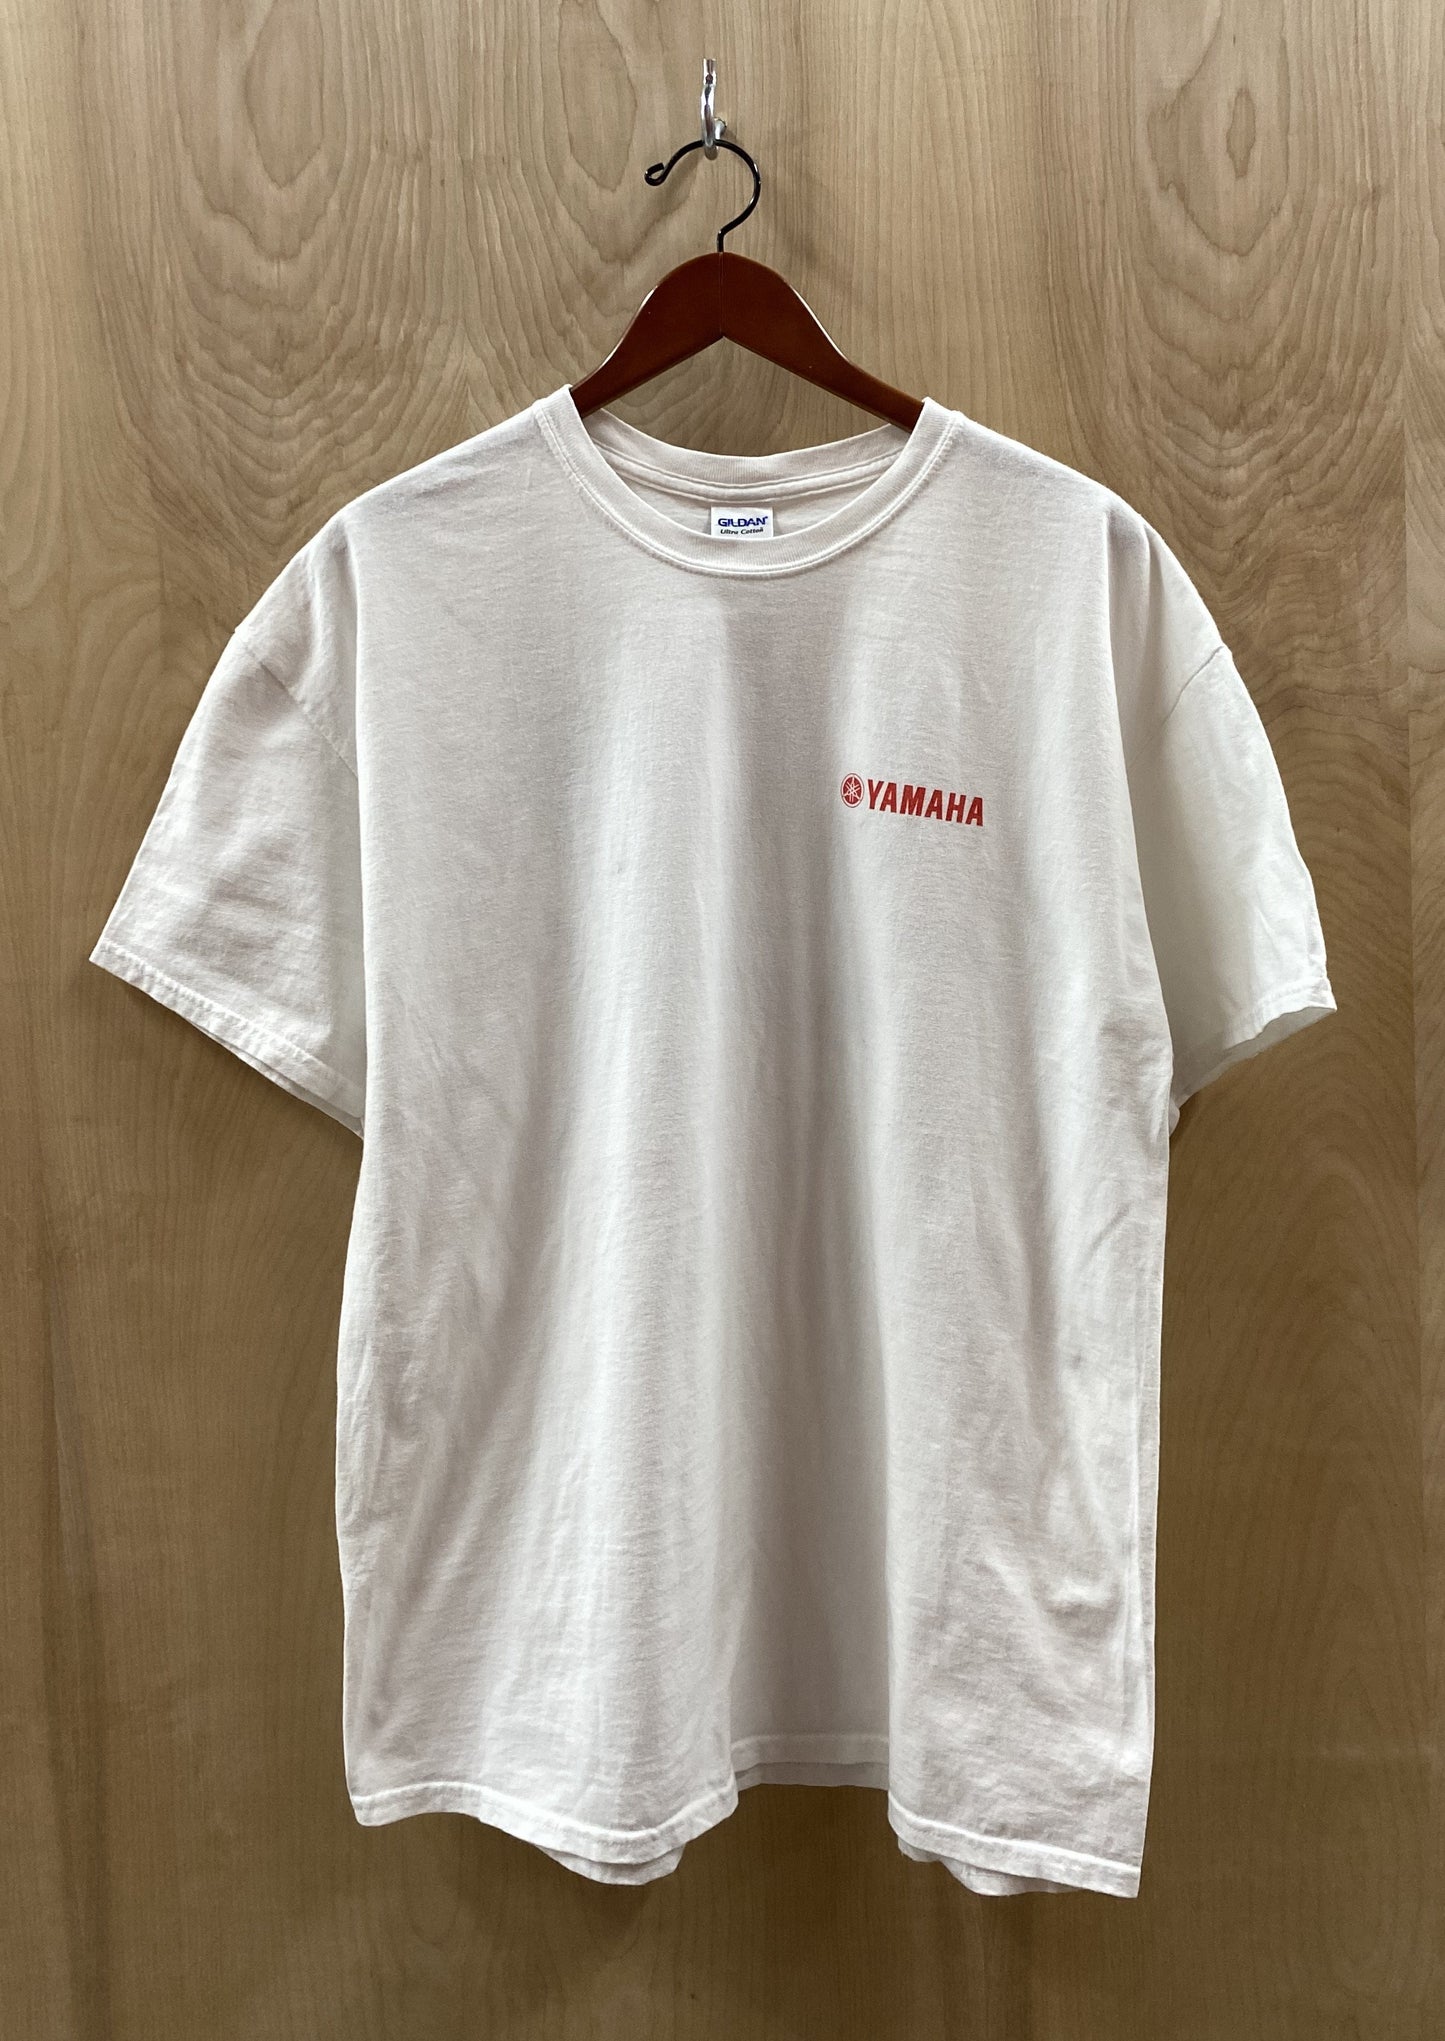 Load image into Gallery viewer, Yamaha Motorboat T-Shirt (4877684572240)
